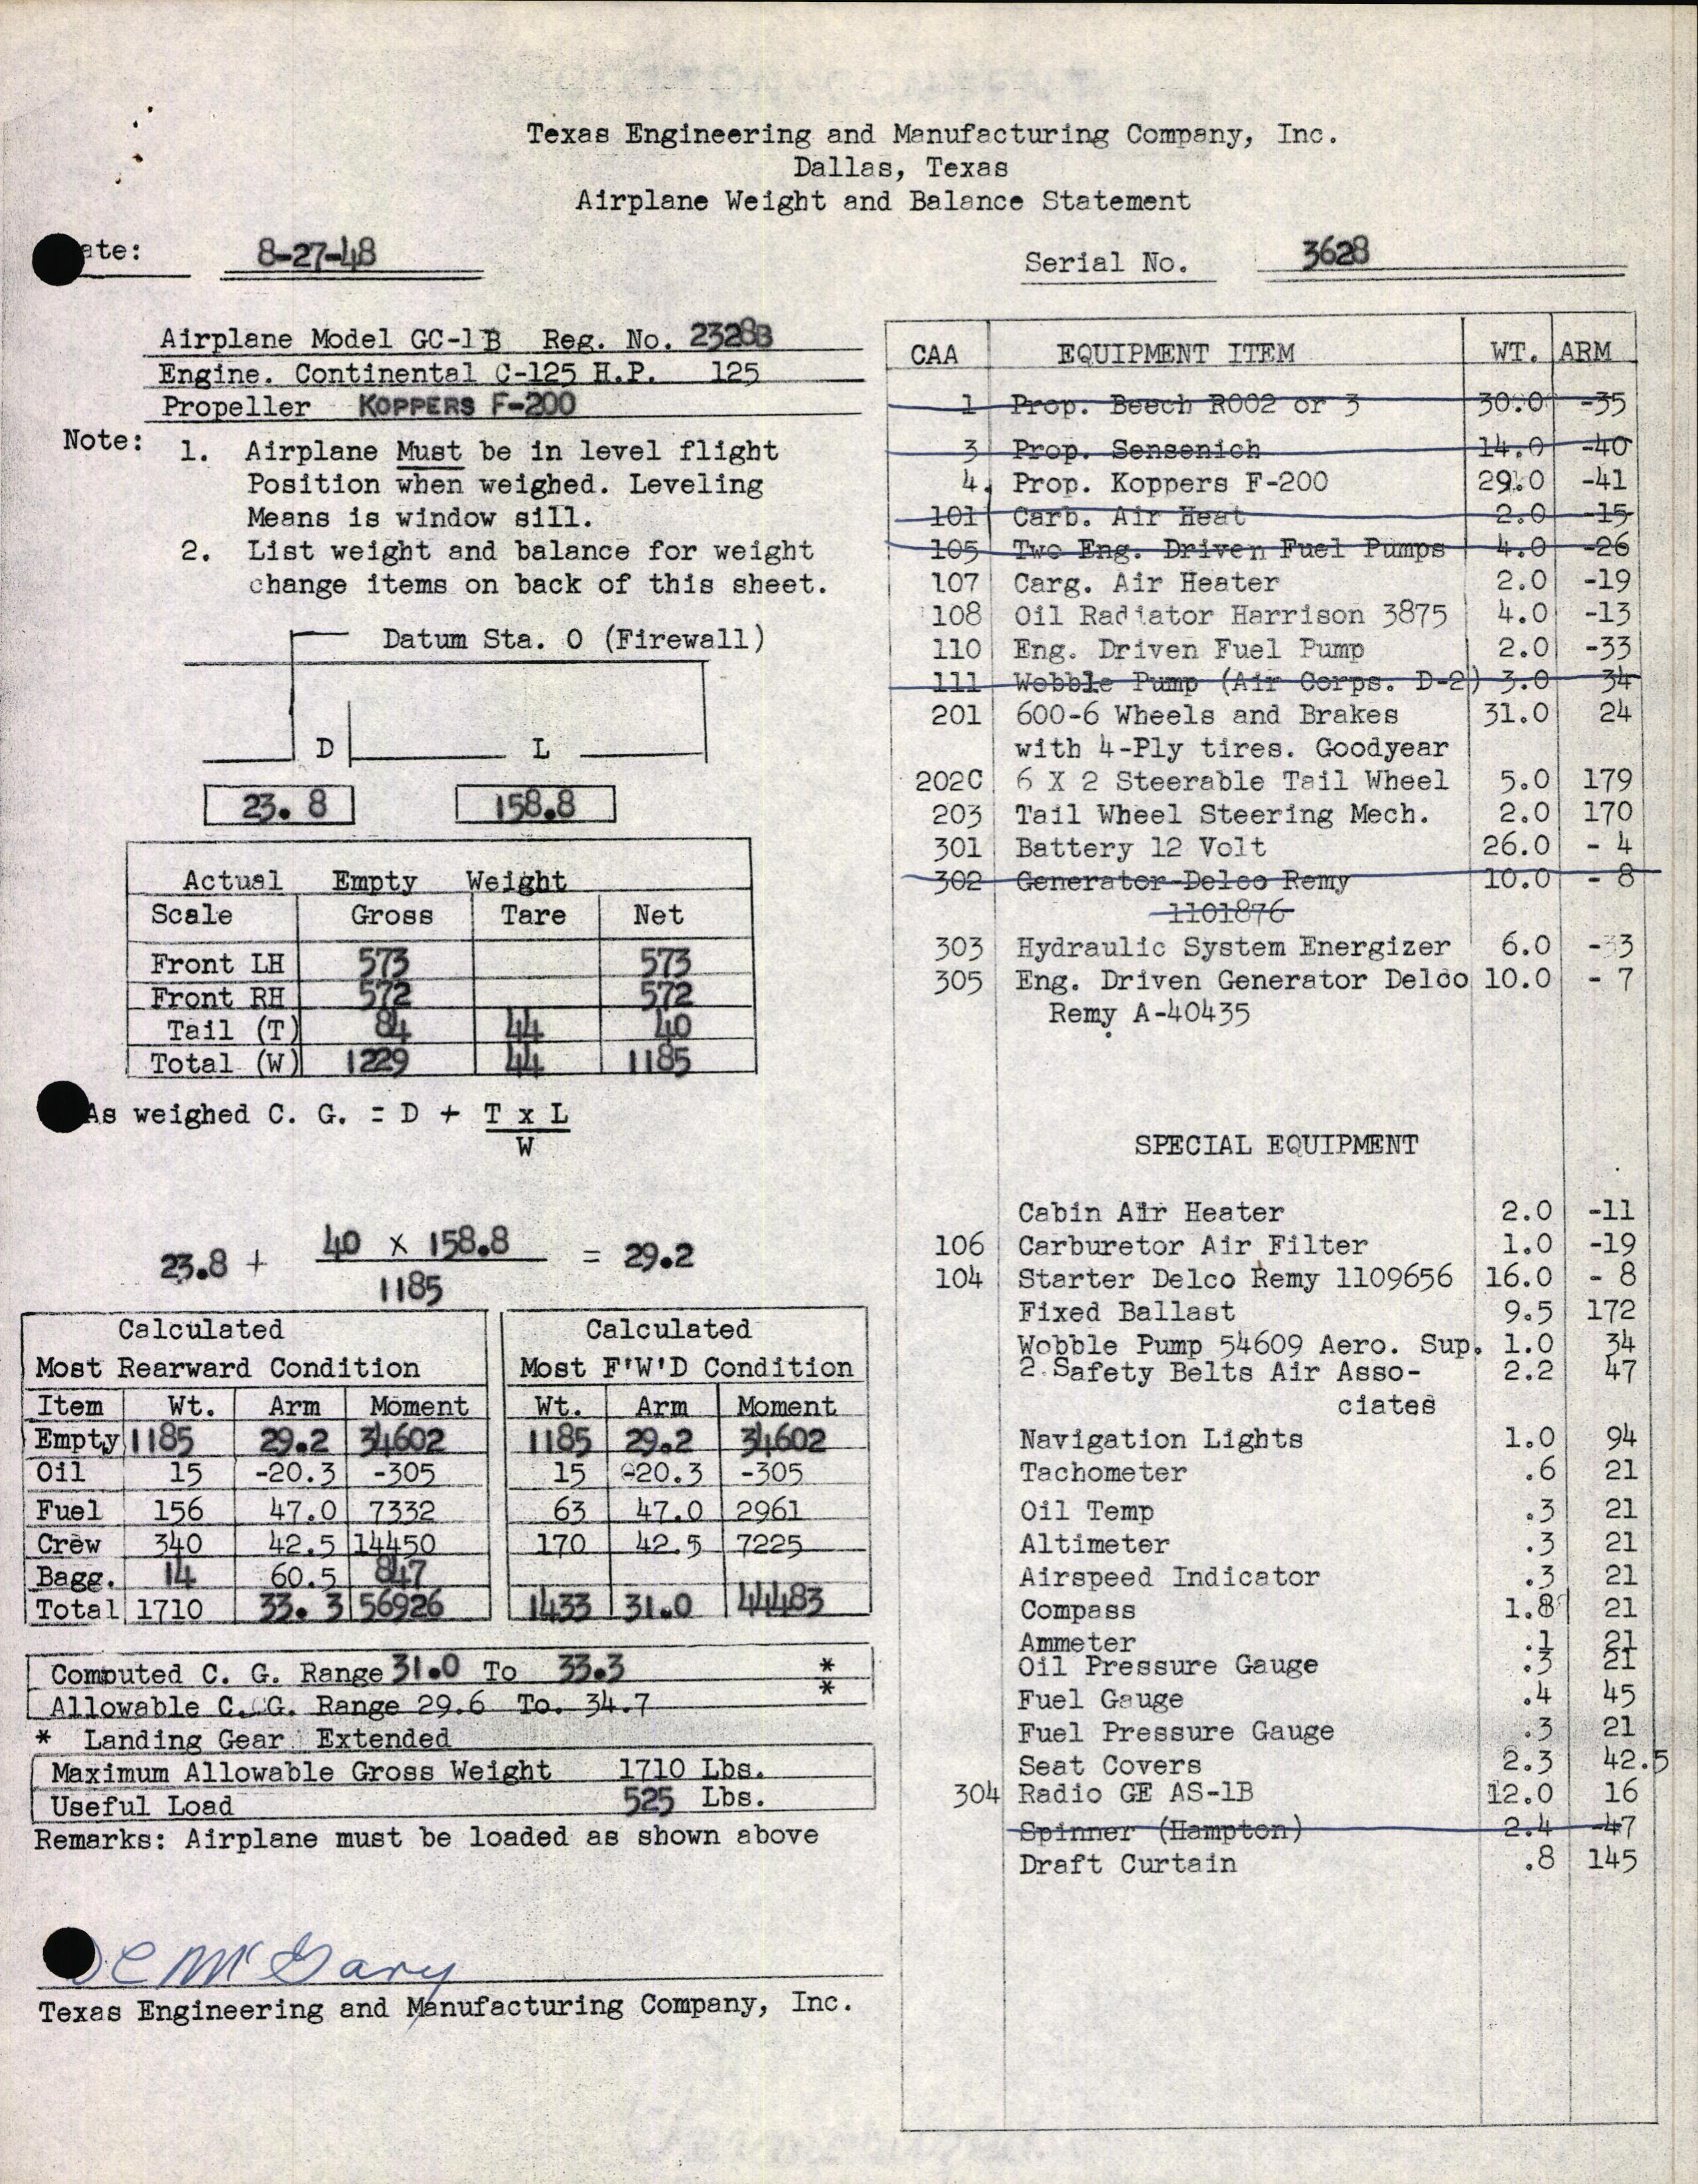 Sample page 4 from AirCorps Library document: Technical Information for Serial Number 3628